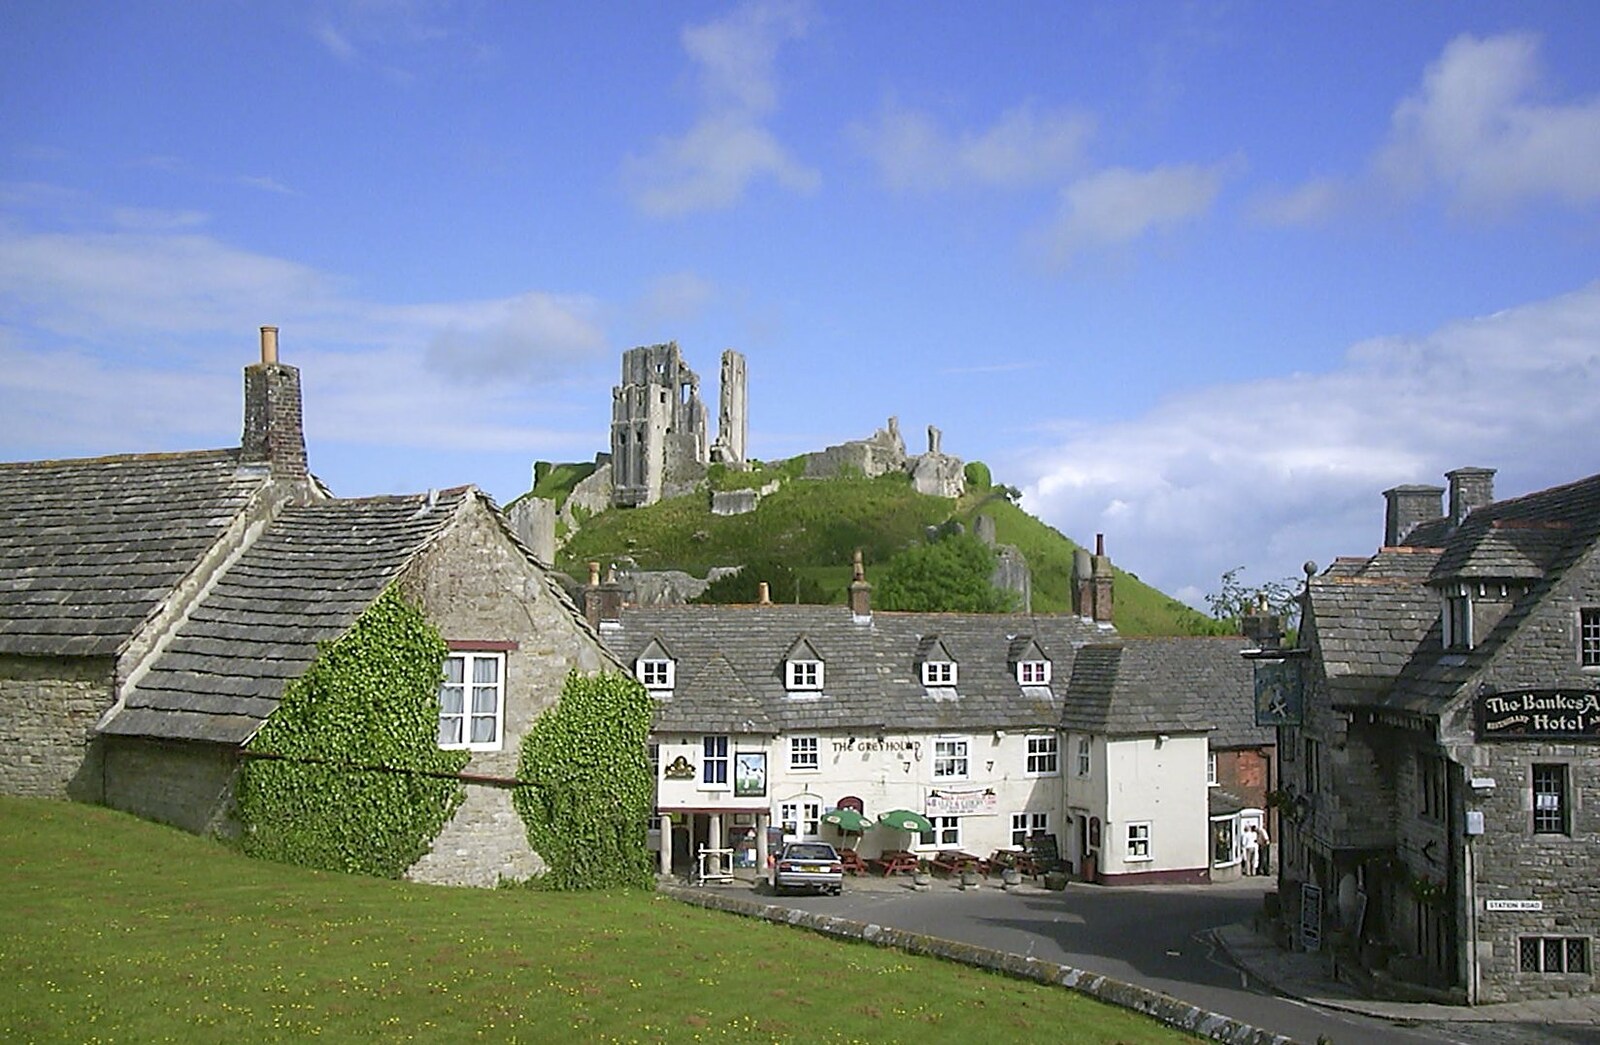 Corfe Castle Camping, Corfe, Dorset - 30th May 2004: Castle on the hill